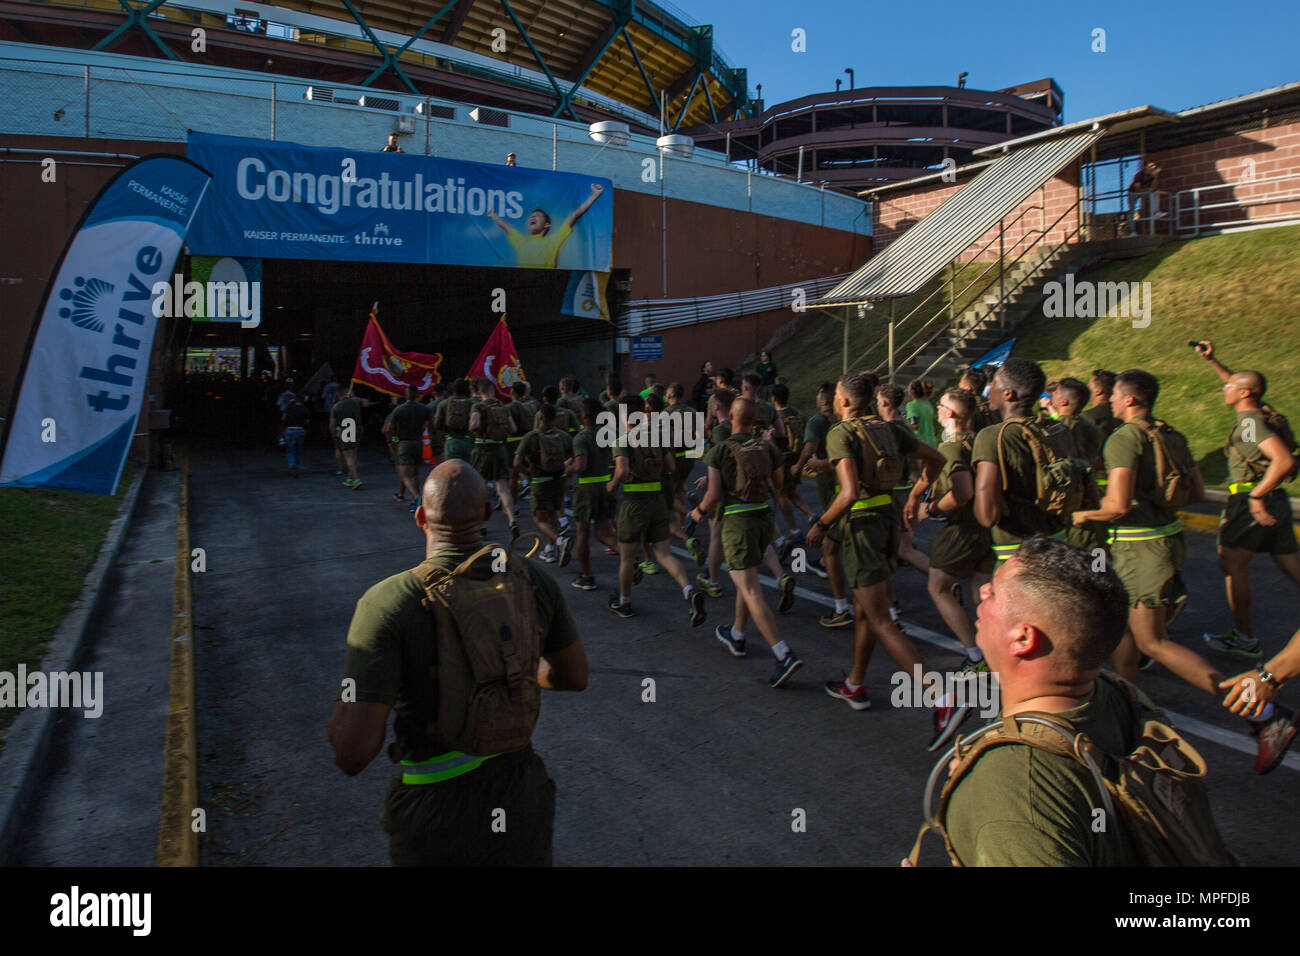 U.S. Marines with Combat Logistics Battalion 3, and U.S. Marine Corps Forces, Pacific, Headquarters and Service Battalion participate in the 33rd Annual Great Aloha Run in Honolulu, Hawaii, Feb. 20, 2017. Over 20,000 runners took part in the 8.15-mile run from the Aloha tower to the Aloha Stadium. (U.S. Marine Corps photo by Lance Cpl. Miguel A. Rosales) Stock Photo